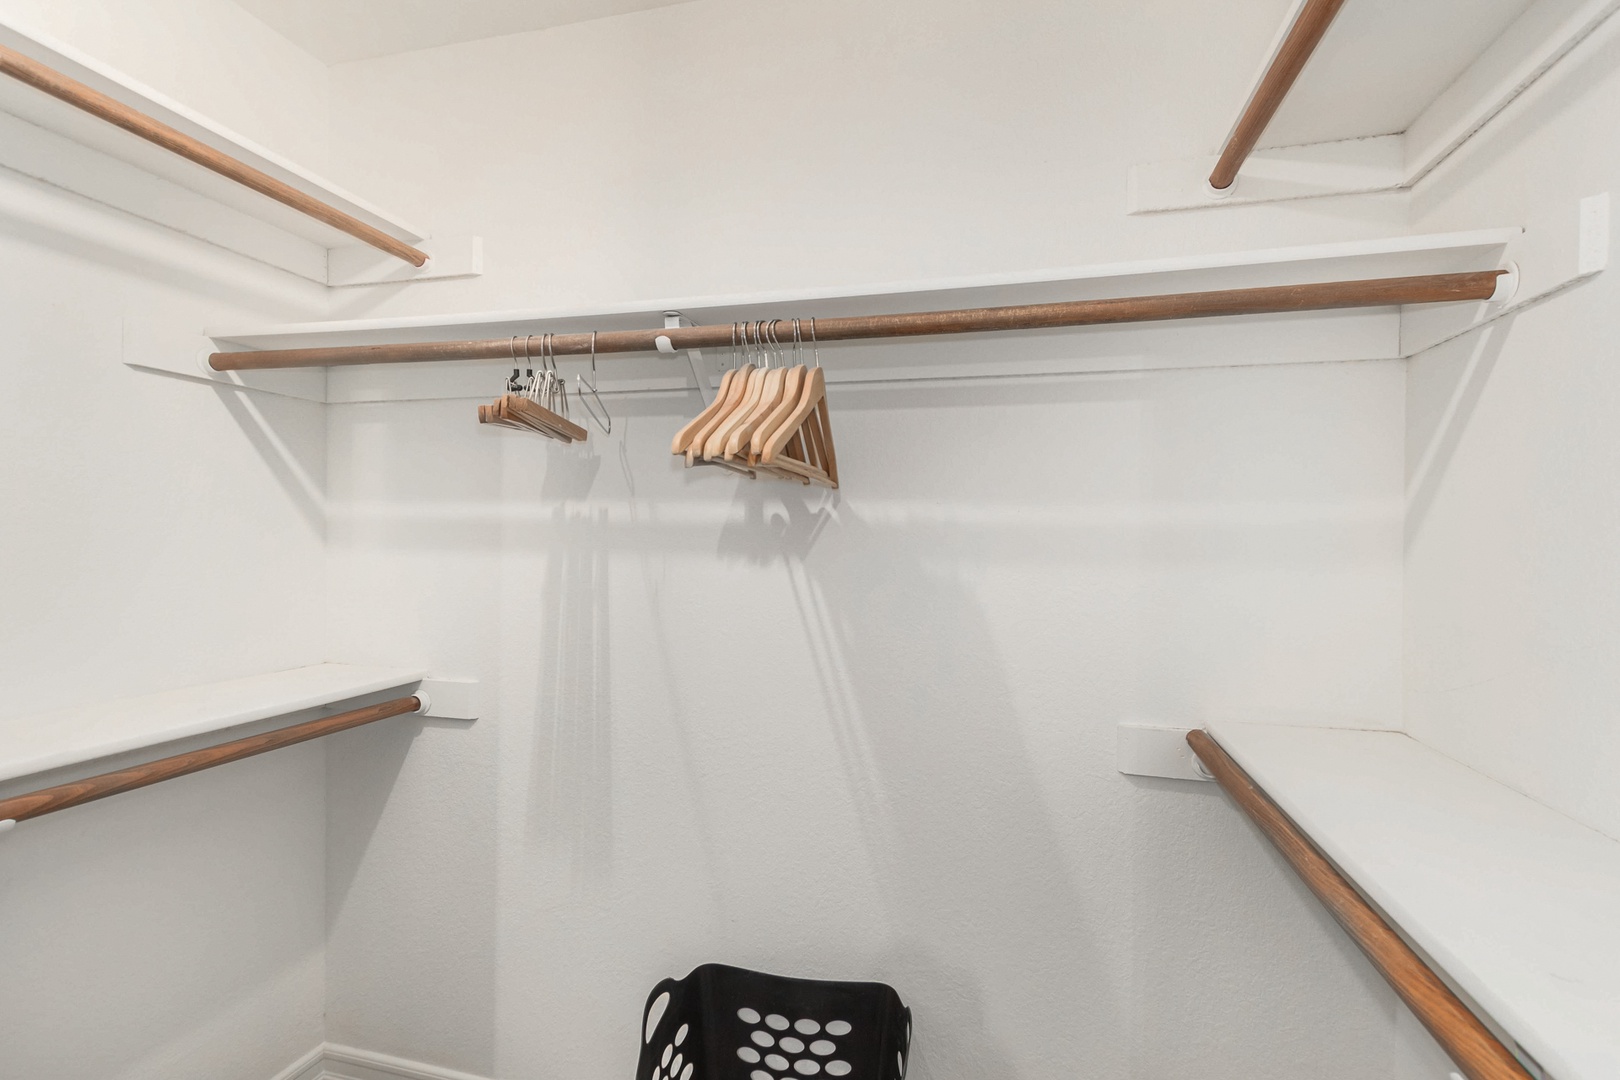 Hangers and clothing storage